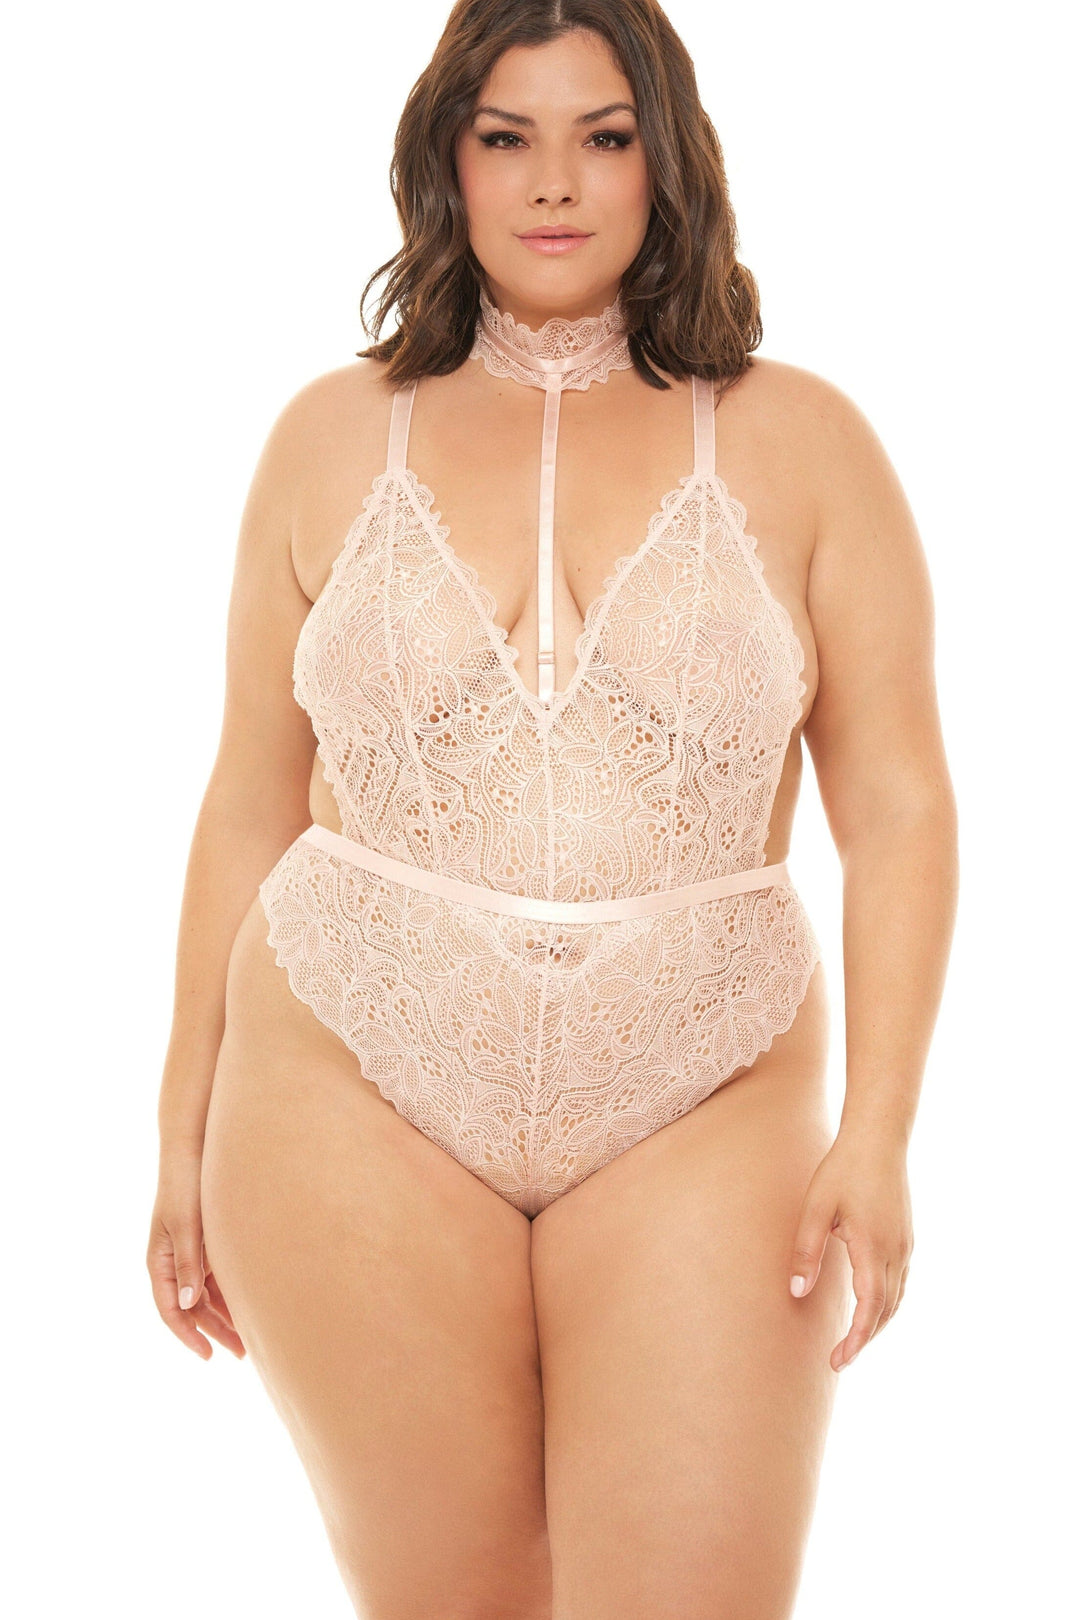 Lace Deep Plunge Teddy With Open Back And Harness Collar Detailing-Teddies-Oh La La Cheri-Nude-3X/4X-SEXYSHOES.COM